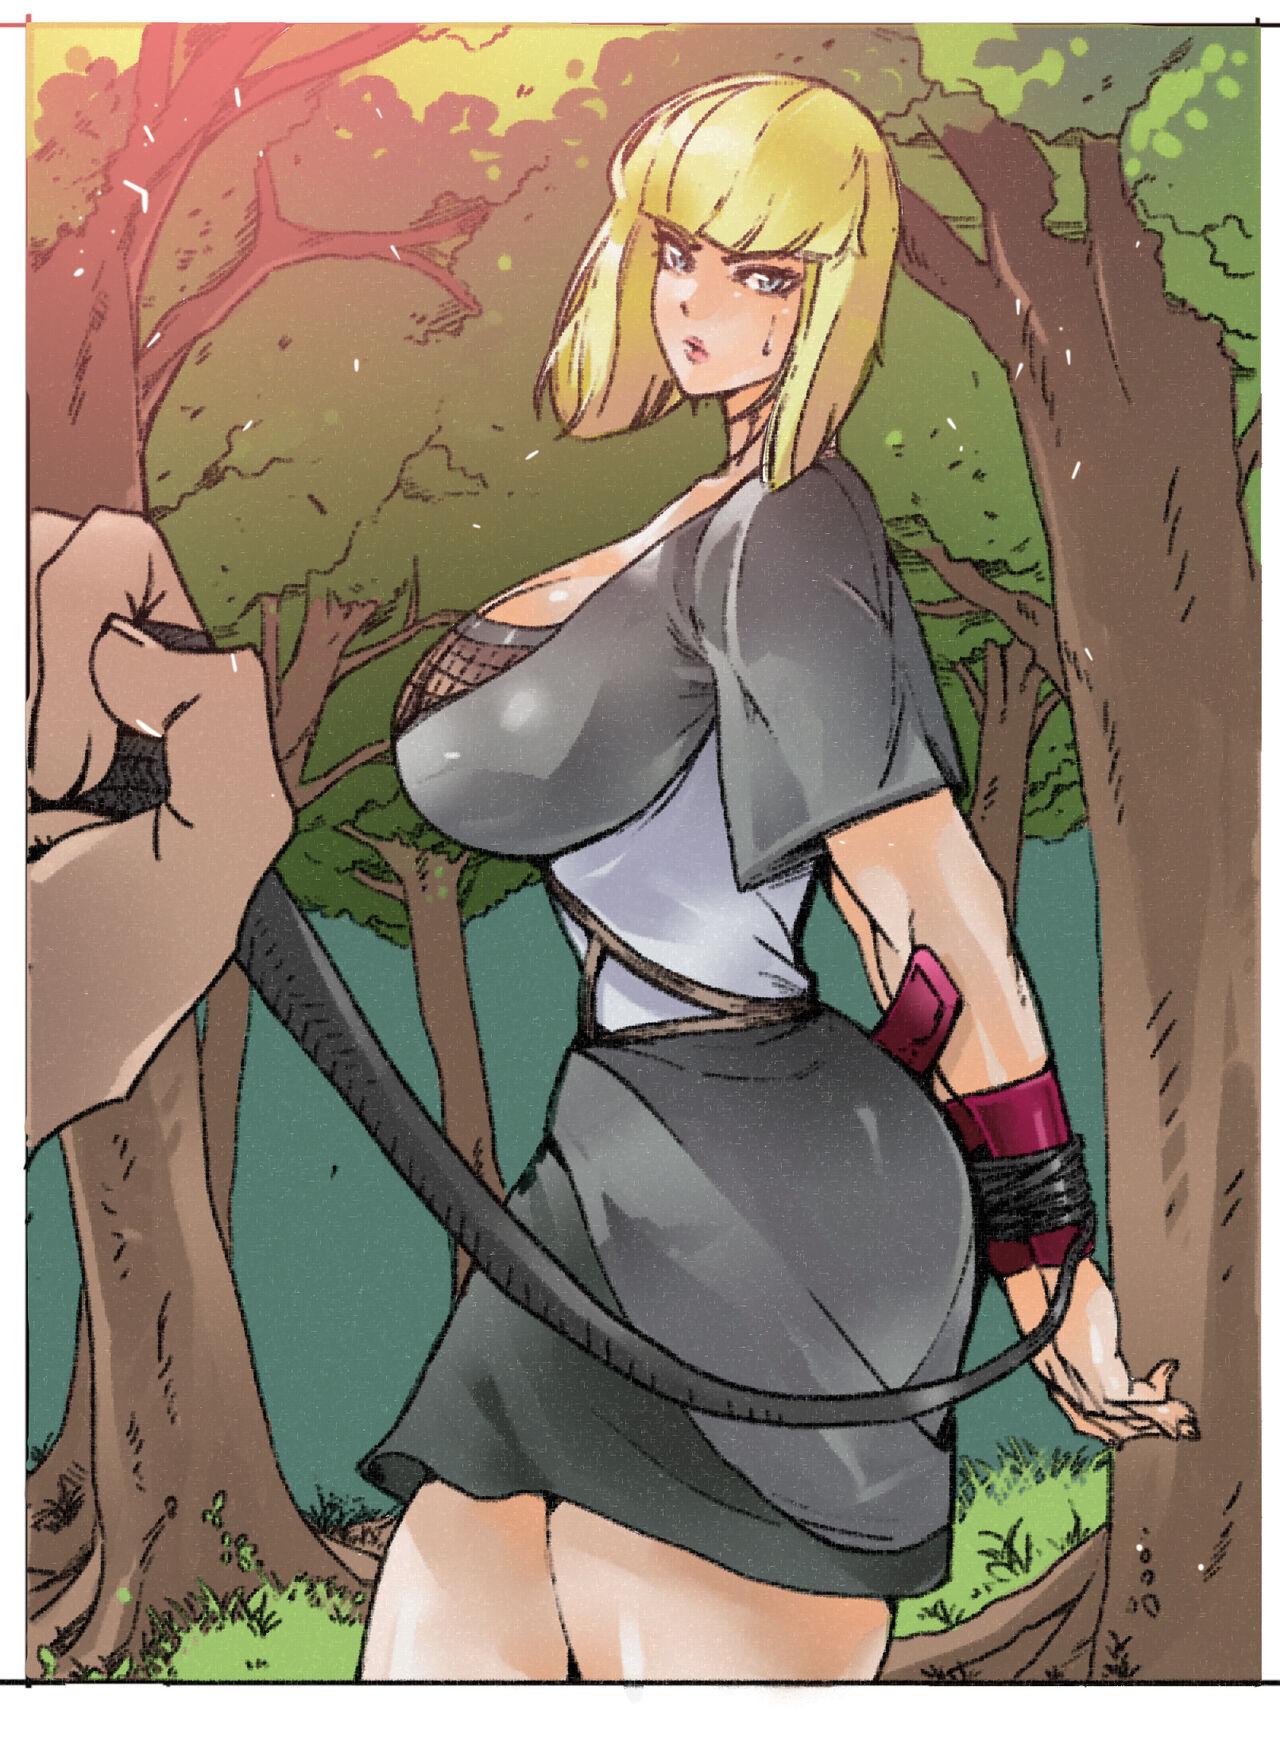 Pegging Captain Samui Isn't Cool Anymore - Naruto Sexy Girl - Picture 2